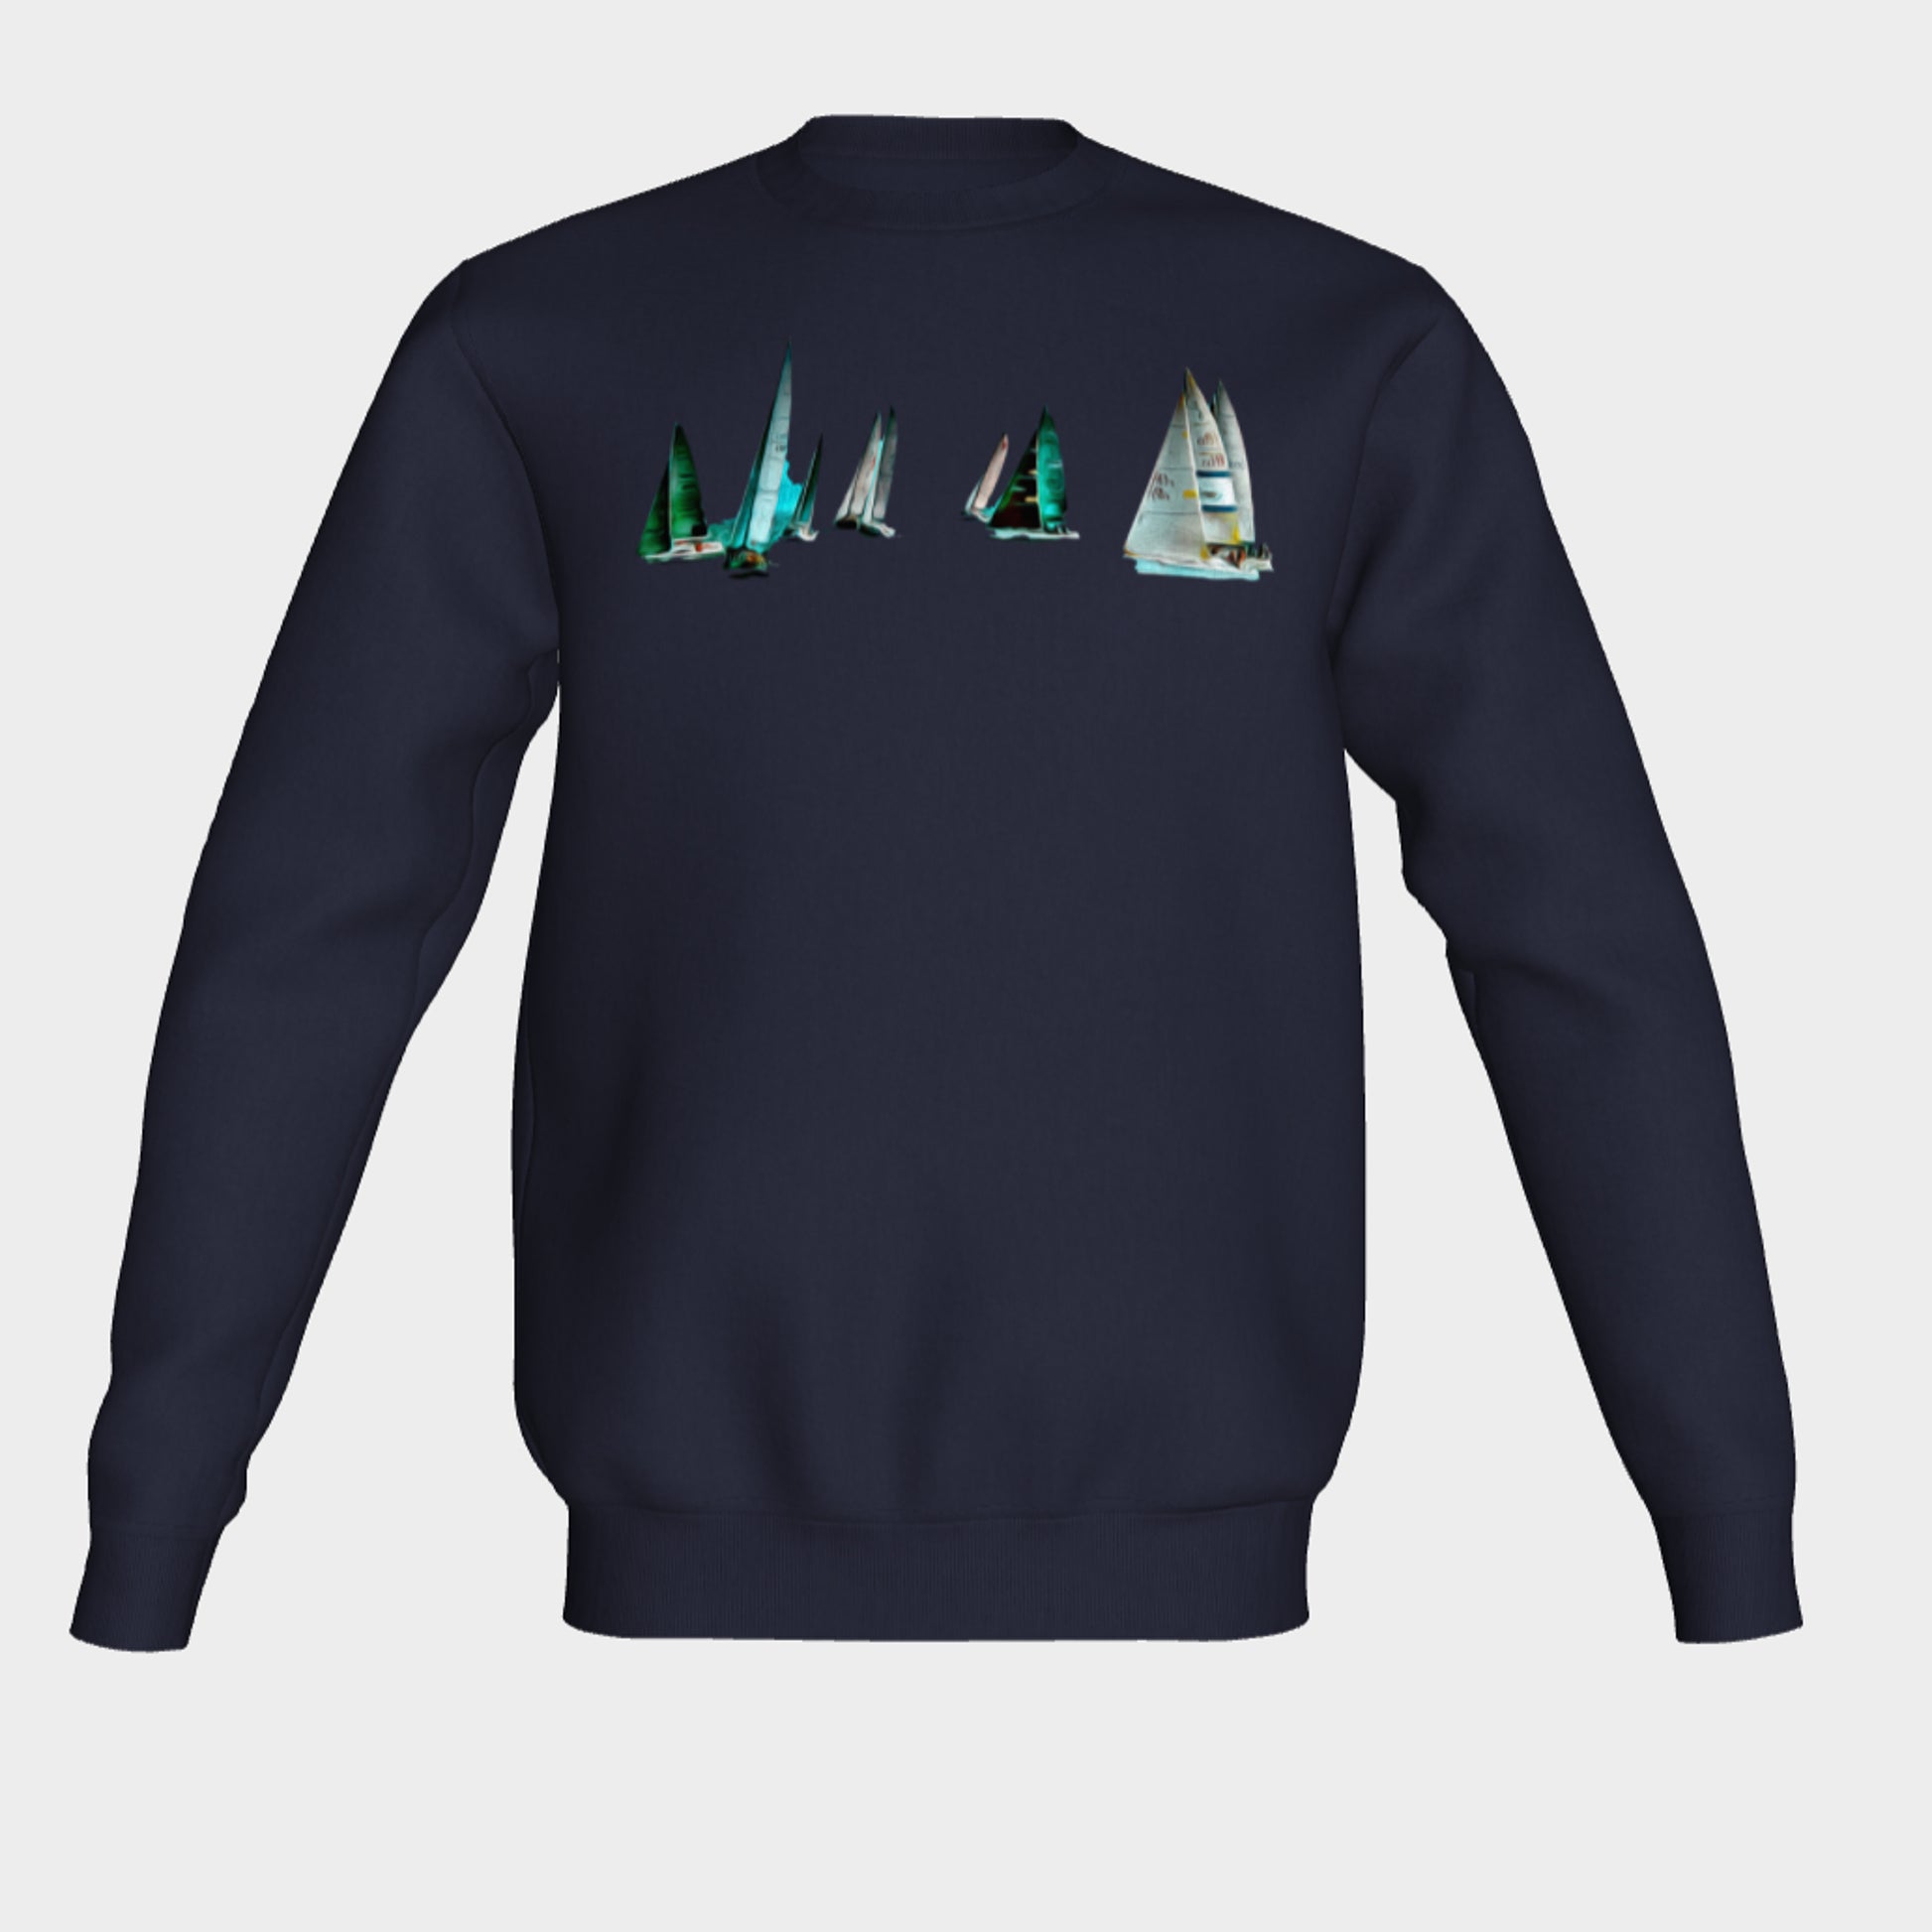 Sail Away Crewneck Sweatshirt What’s better than a super cozy sweatshirt? A super cozy sweatshirt from Van Isle Goddess!  Super cozy unisex sweatshirt for those chilly days.  Excellent for men or women.   Fit is roomy and comfortable. 